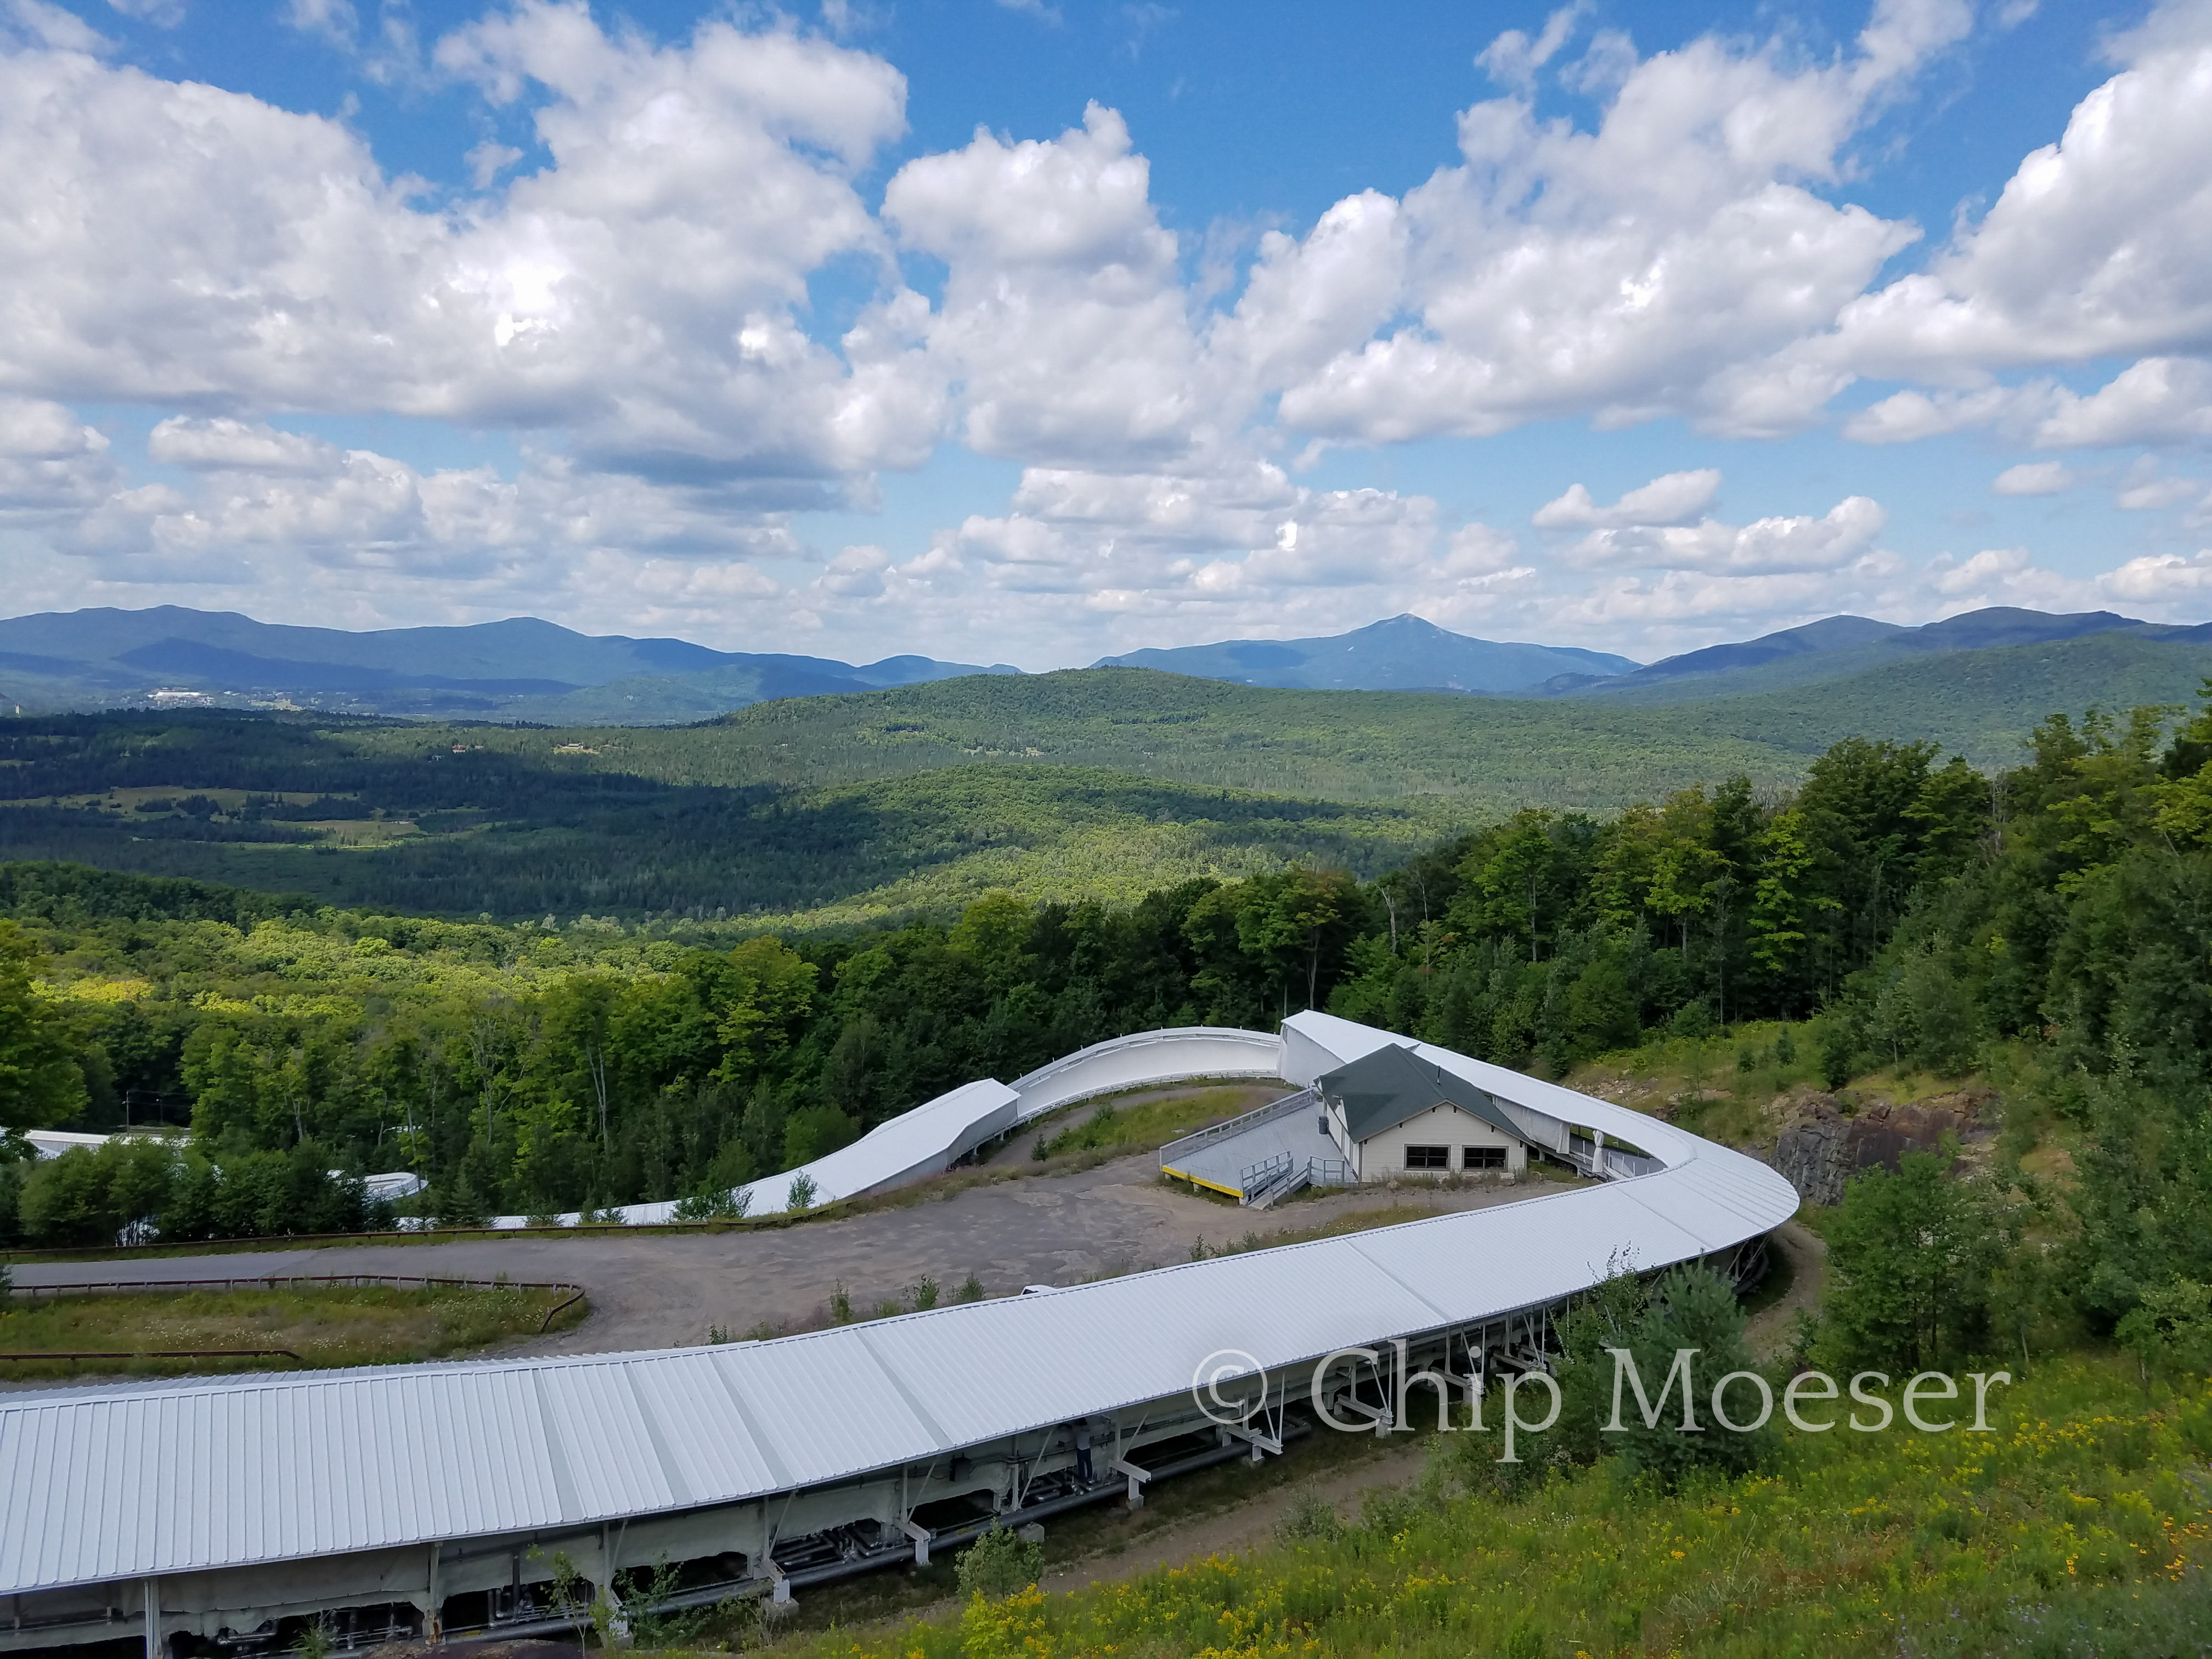 Looking north over the bobsled tracks